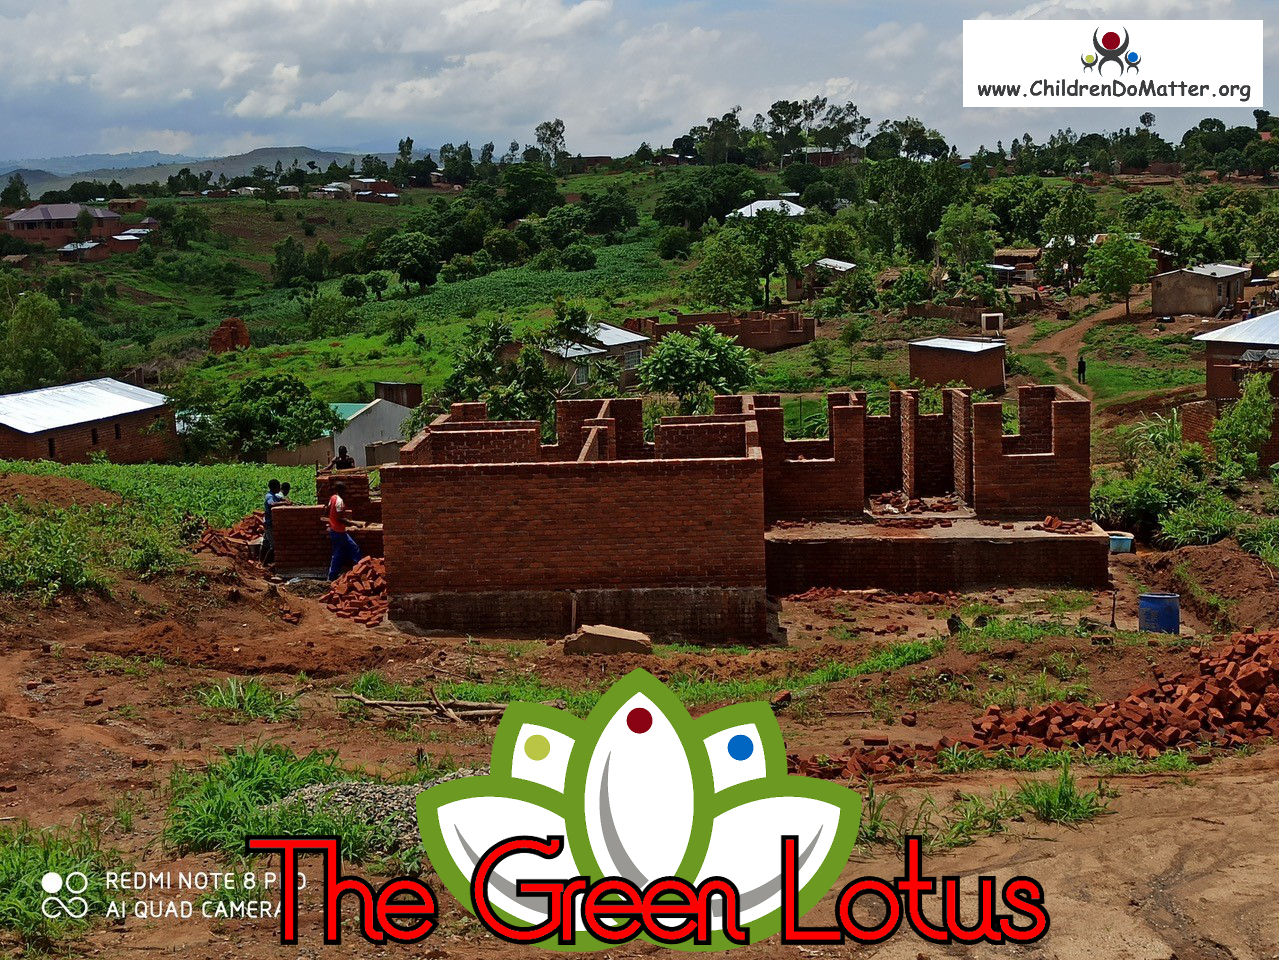 the making of the green lotus orphanage in blantyre malawi - children do matter - 15